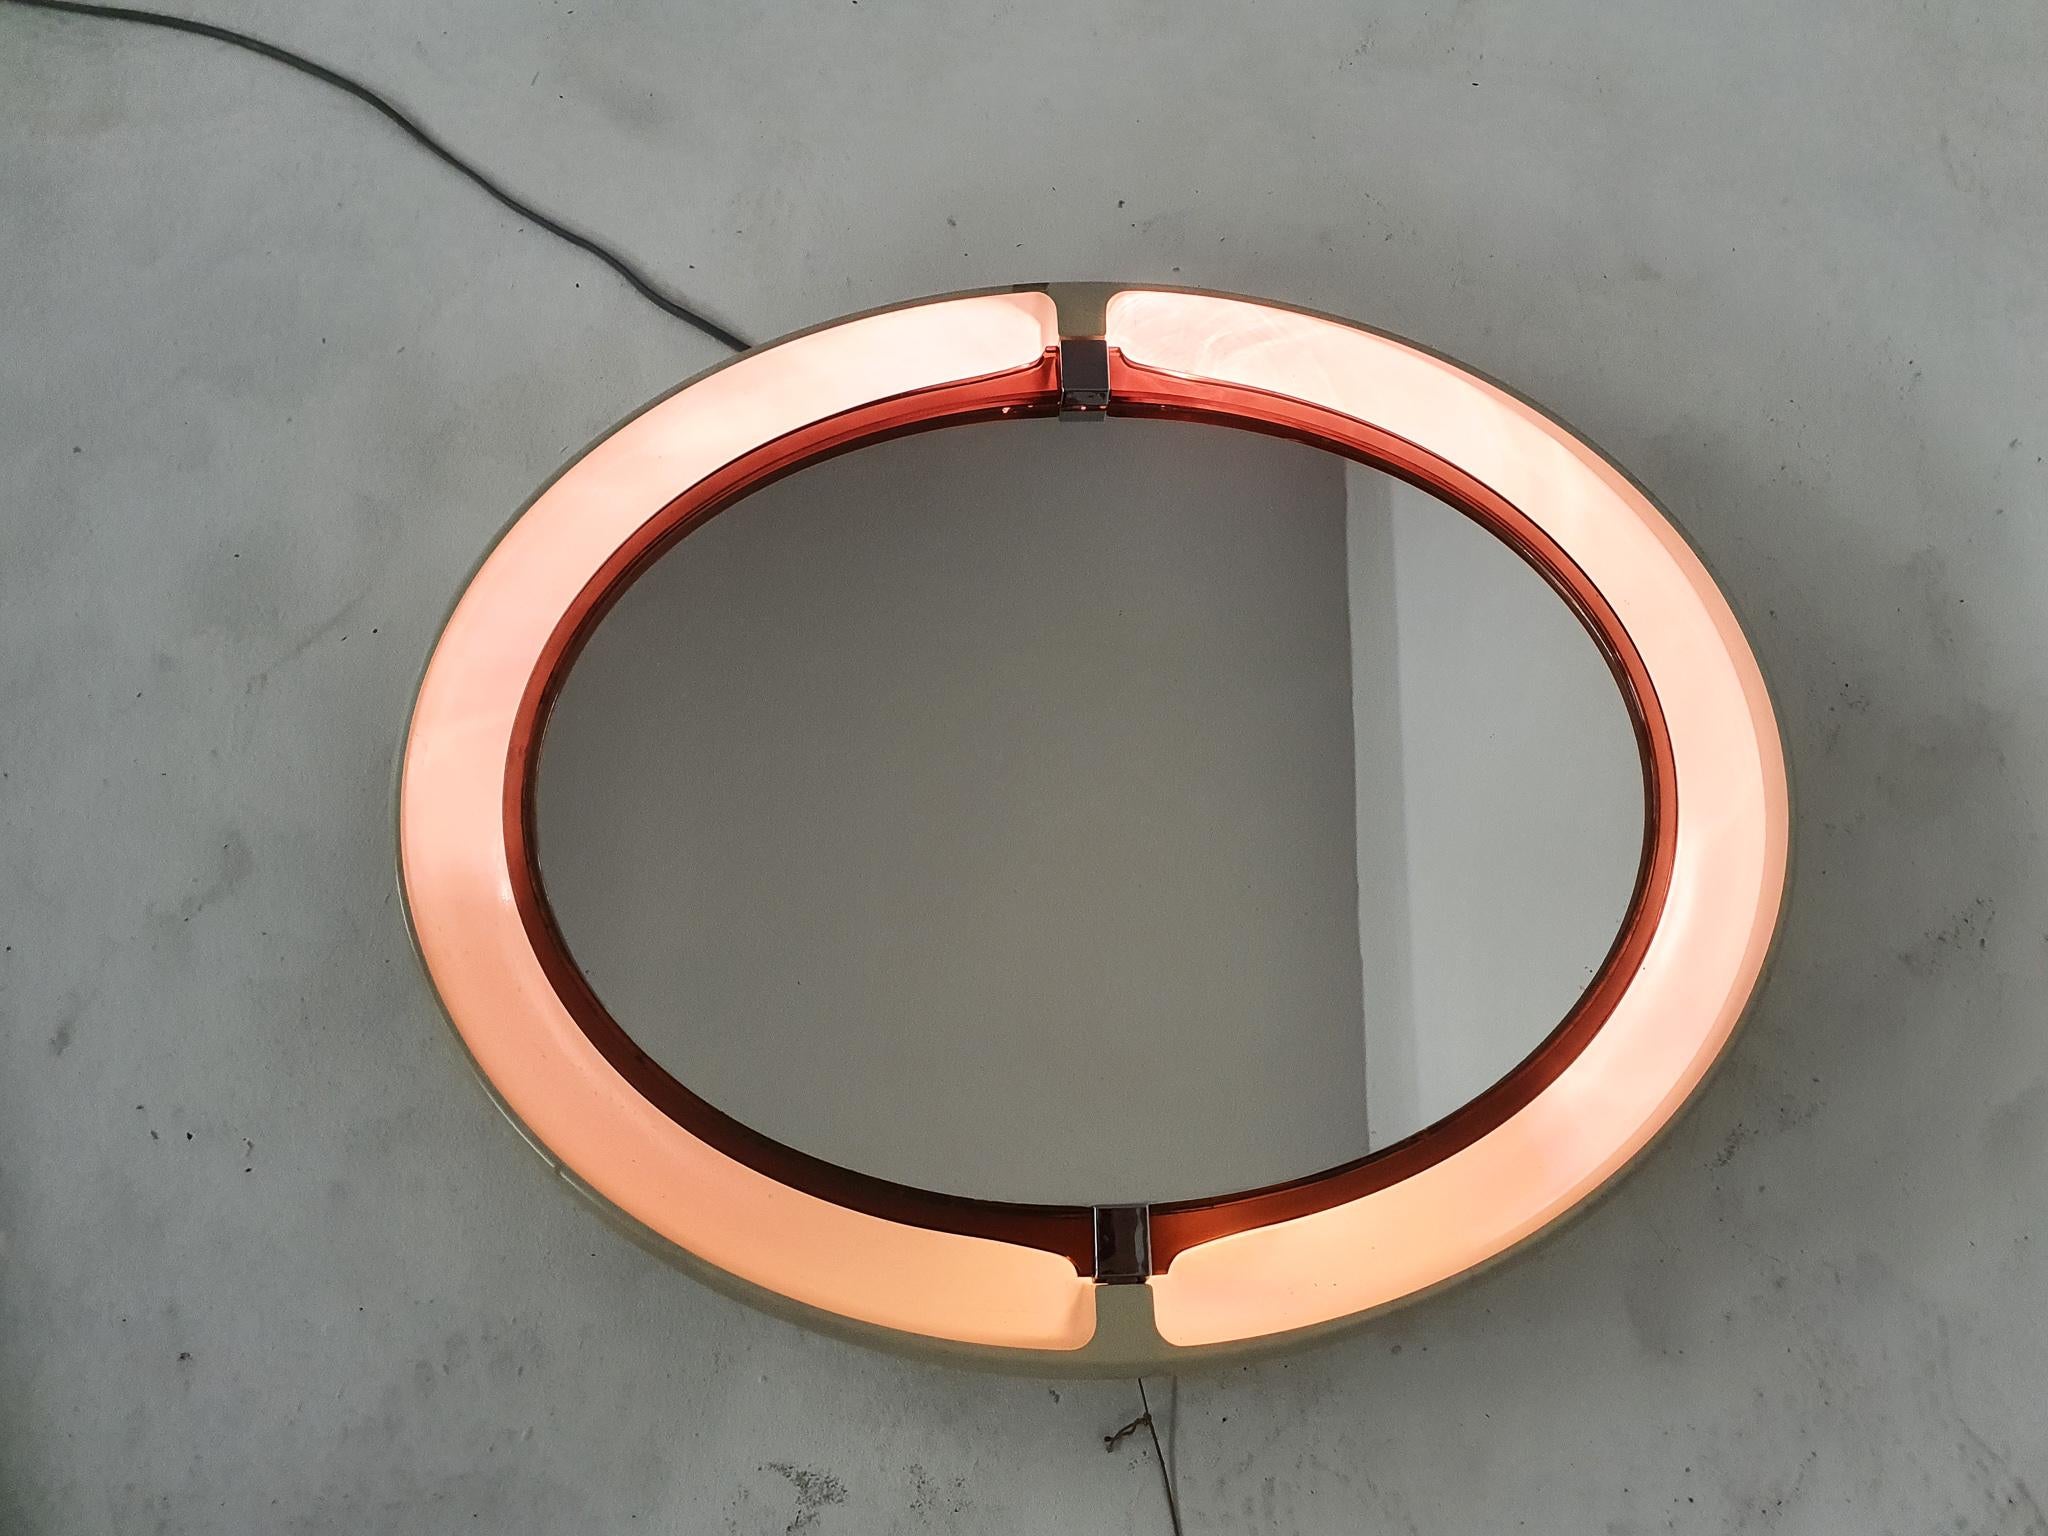 Late 20th Century White Oval Space Age Mirror by Allibert, Germany 1970's